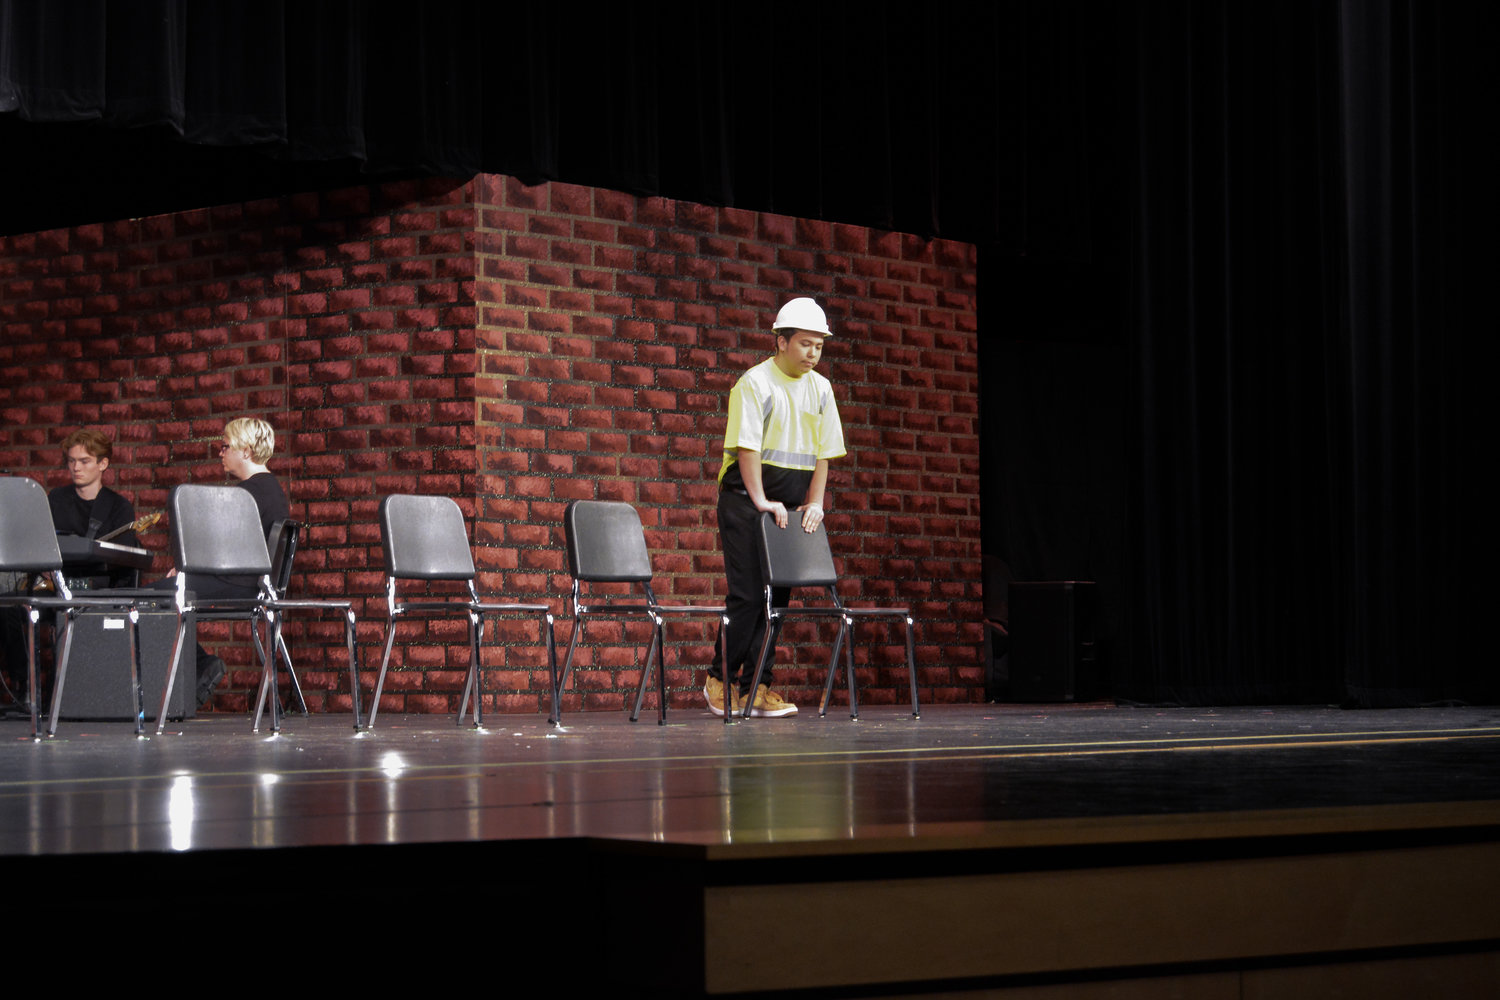 A.J. Hicks performs his rendition of “Iron Worker” during the musical titled "Working."